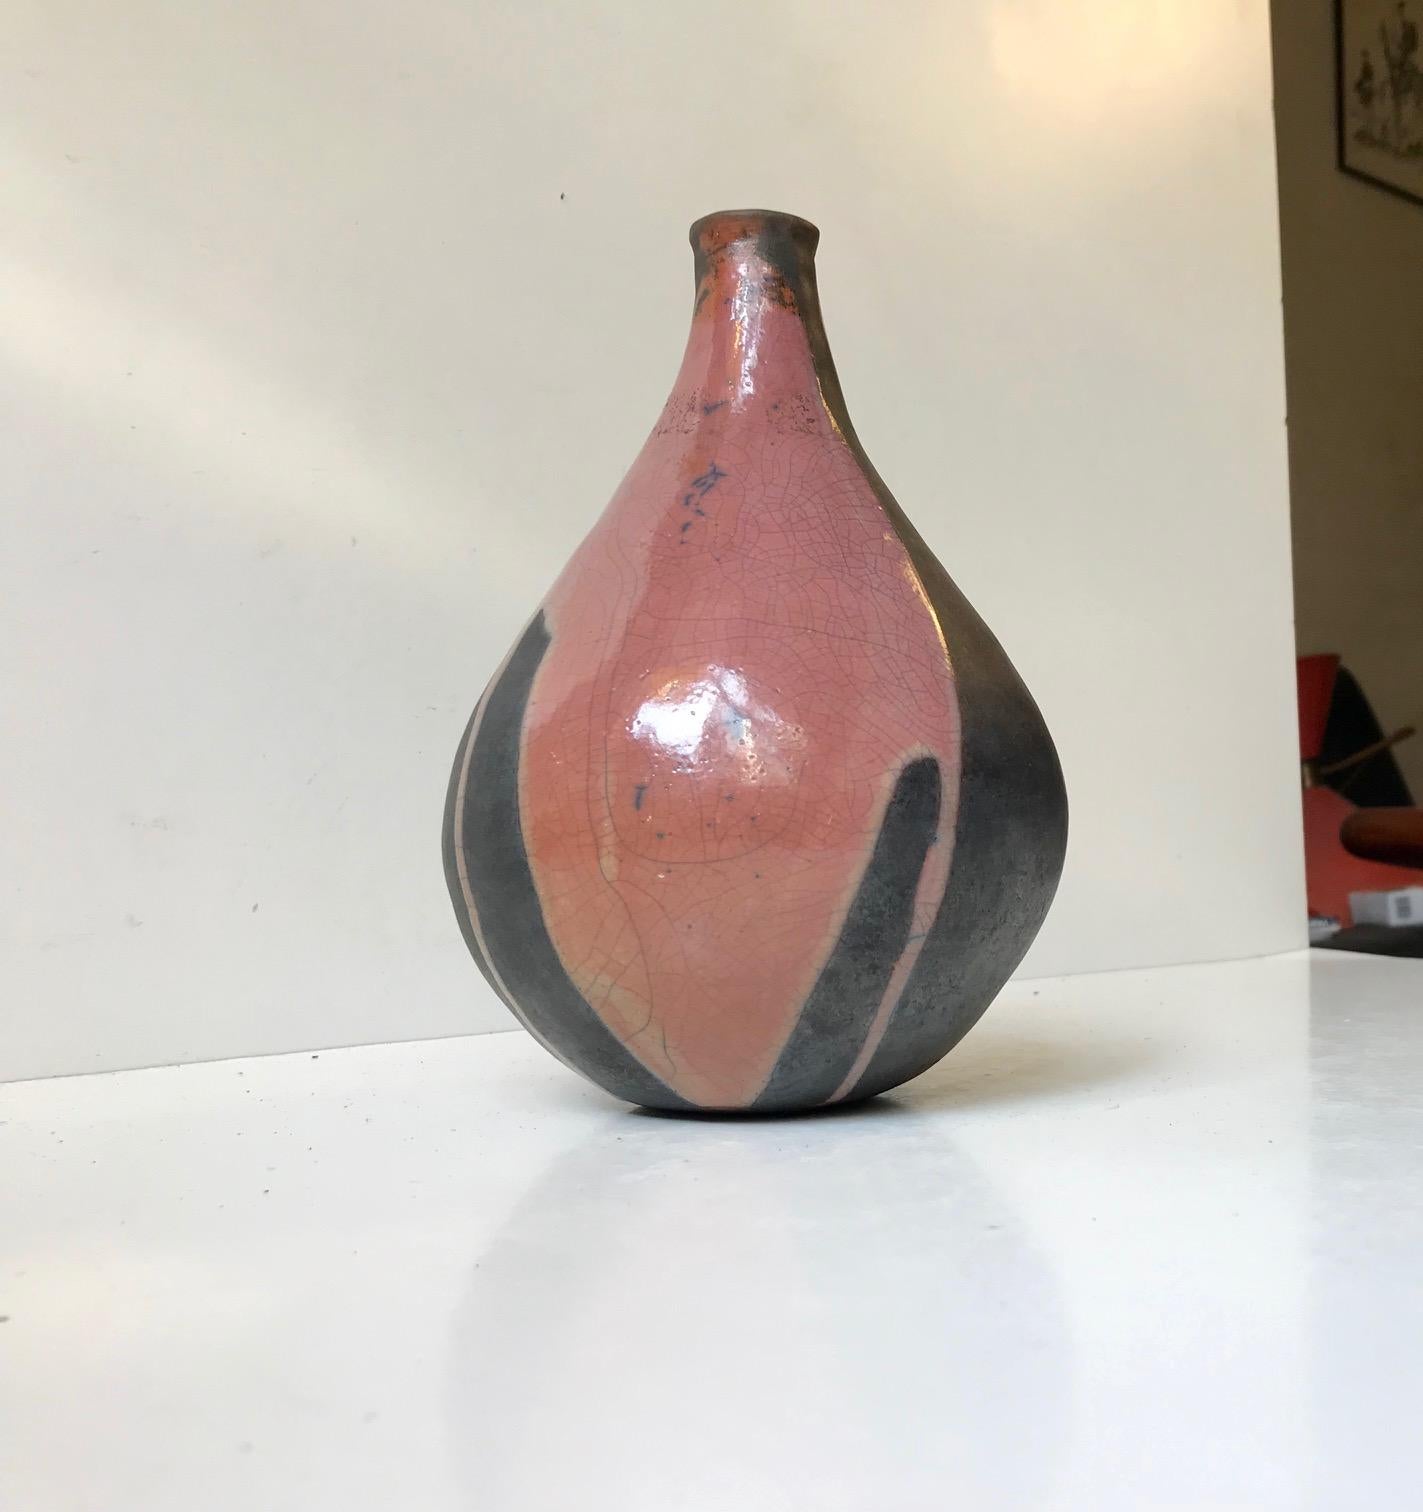 A hand thrown and raku fired ceramic vase by an anonymous Scandinavian designer/maker. This piece is signed but not identified.